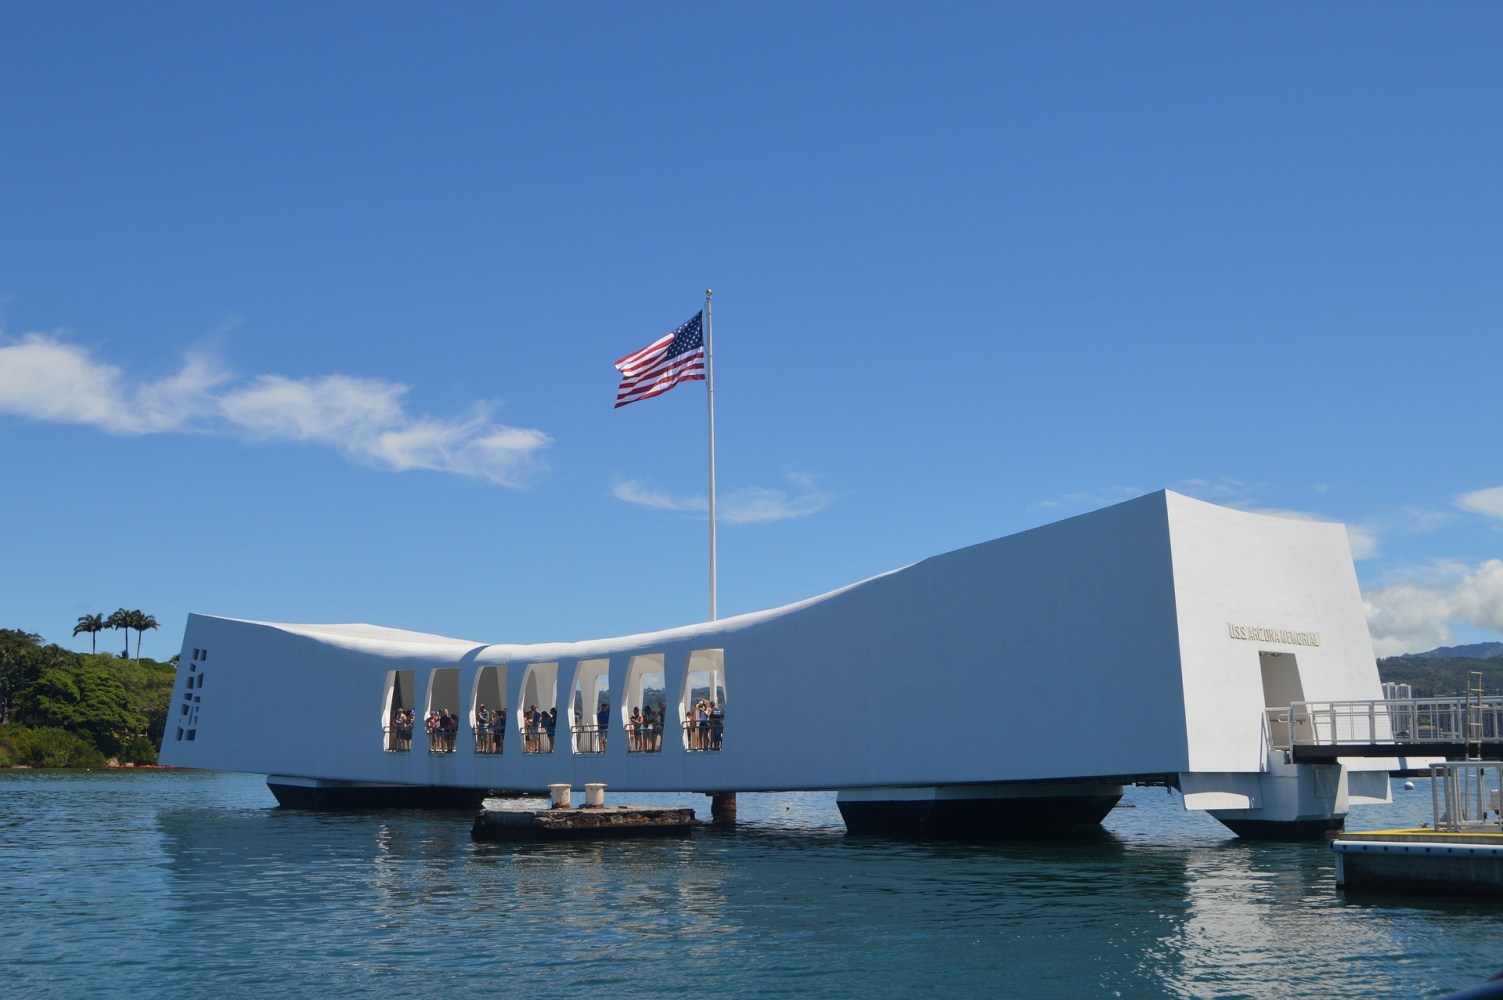 a large ship in a body of water with USS Arizona Memorial in the background